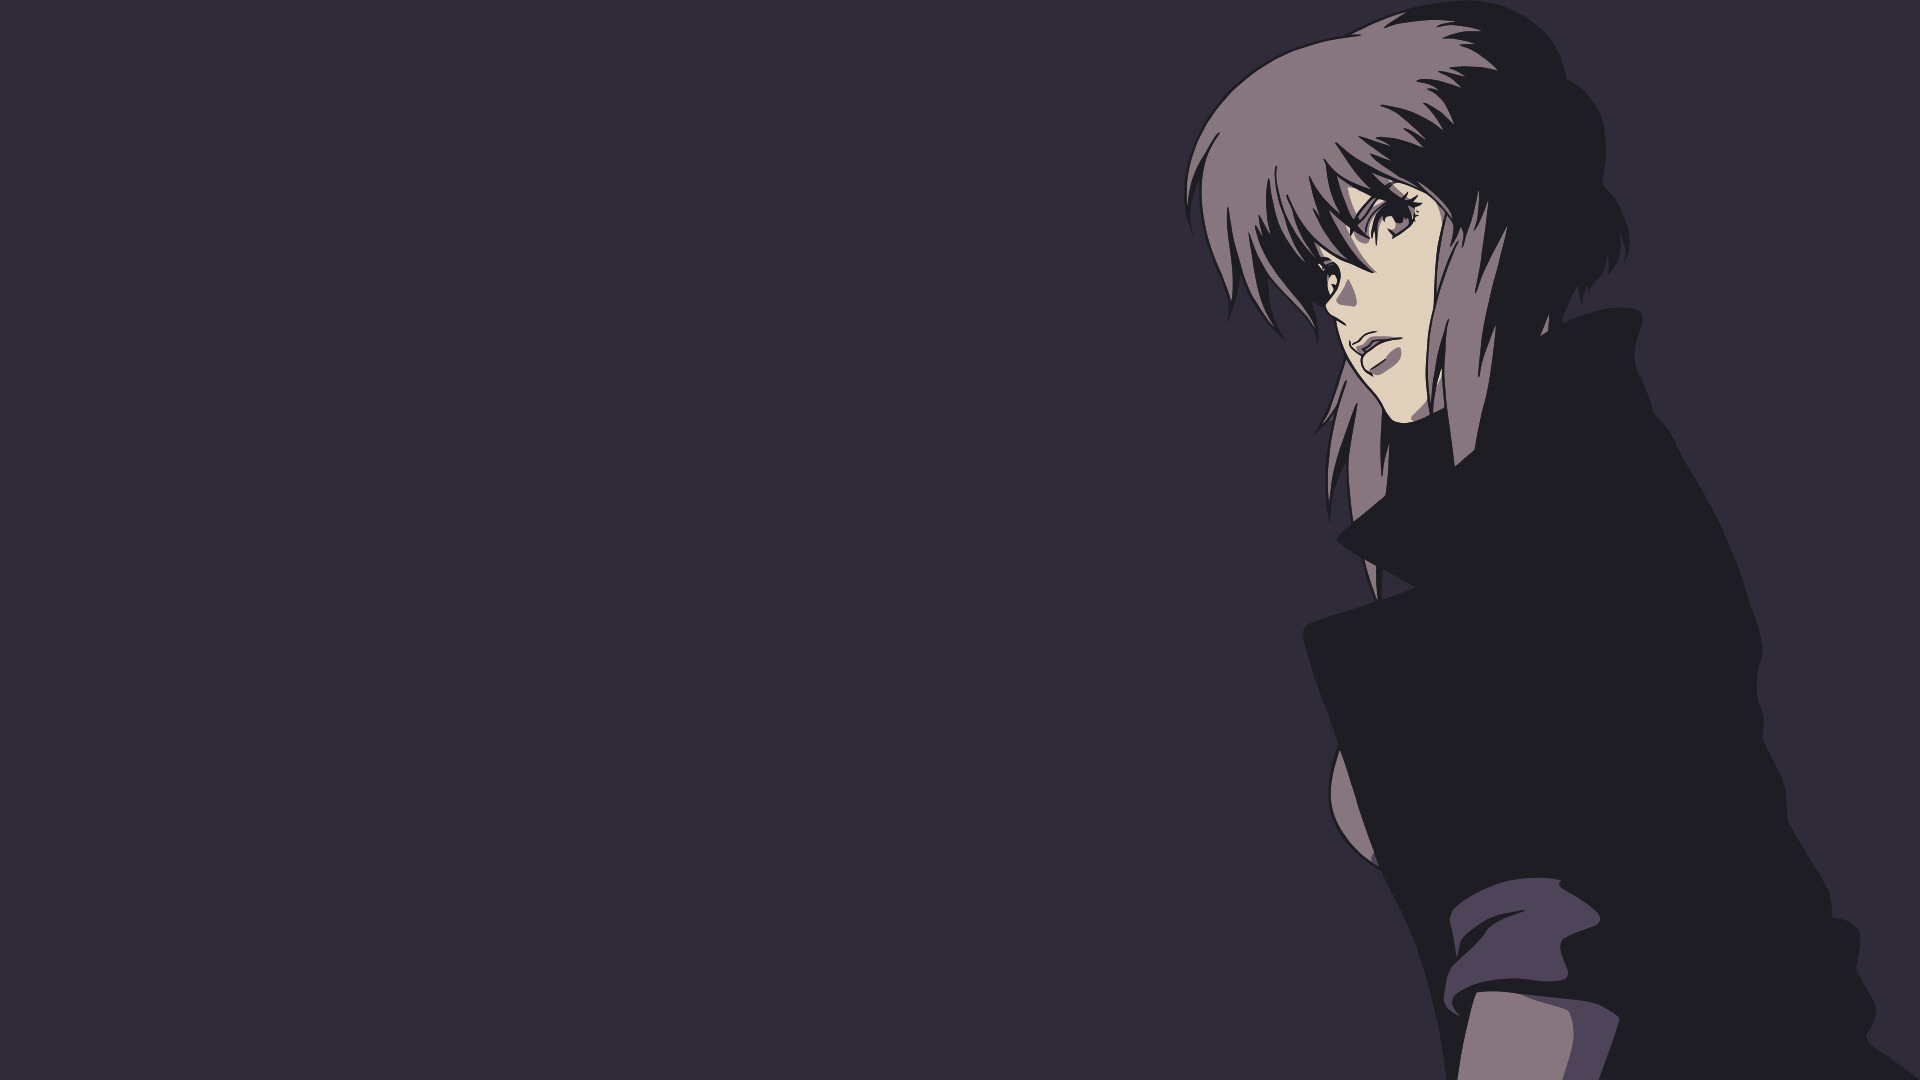 Ghost in the Shell (Anime): Major Motoko Kusanagi in the Stand Alone Complex - the popular Japanese animated TV series. 1920x1080 Full HD Wallpaper.